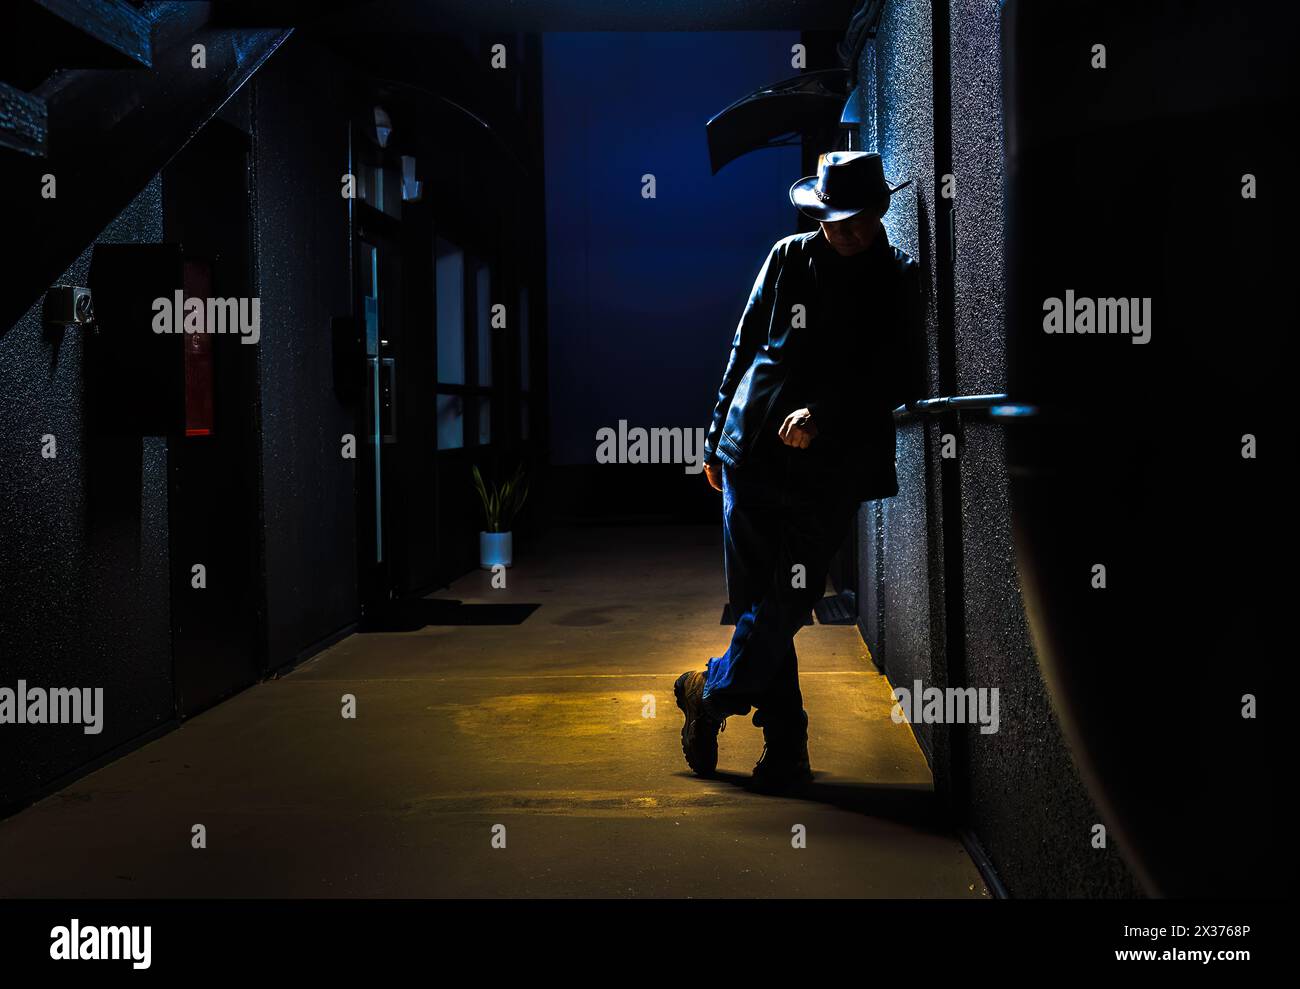 Silhouette of a man leaning against a wall in a dark alleyway at night. Depression and loneliness concept. Stock Photo